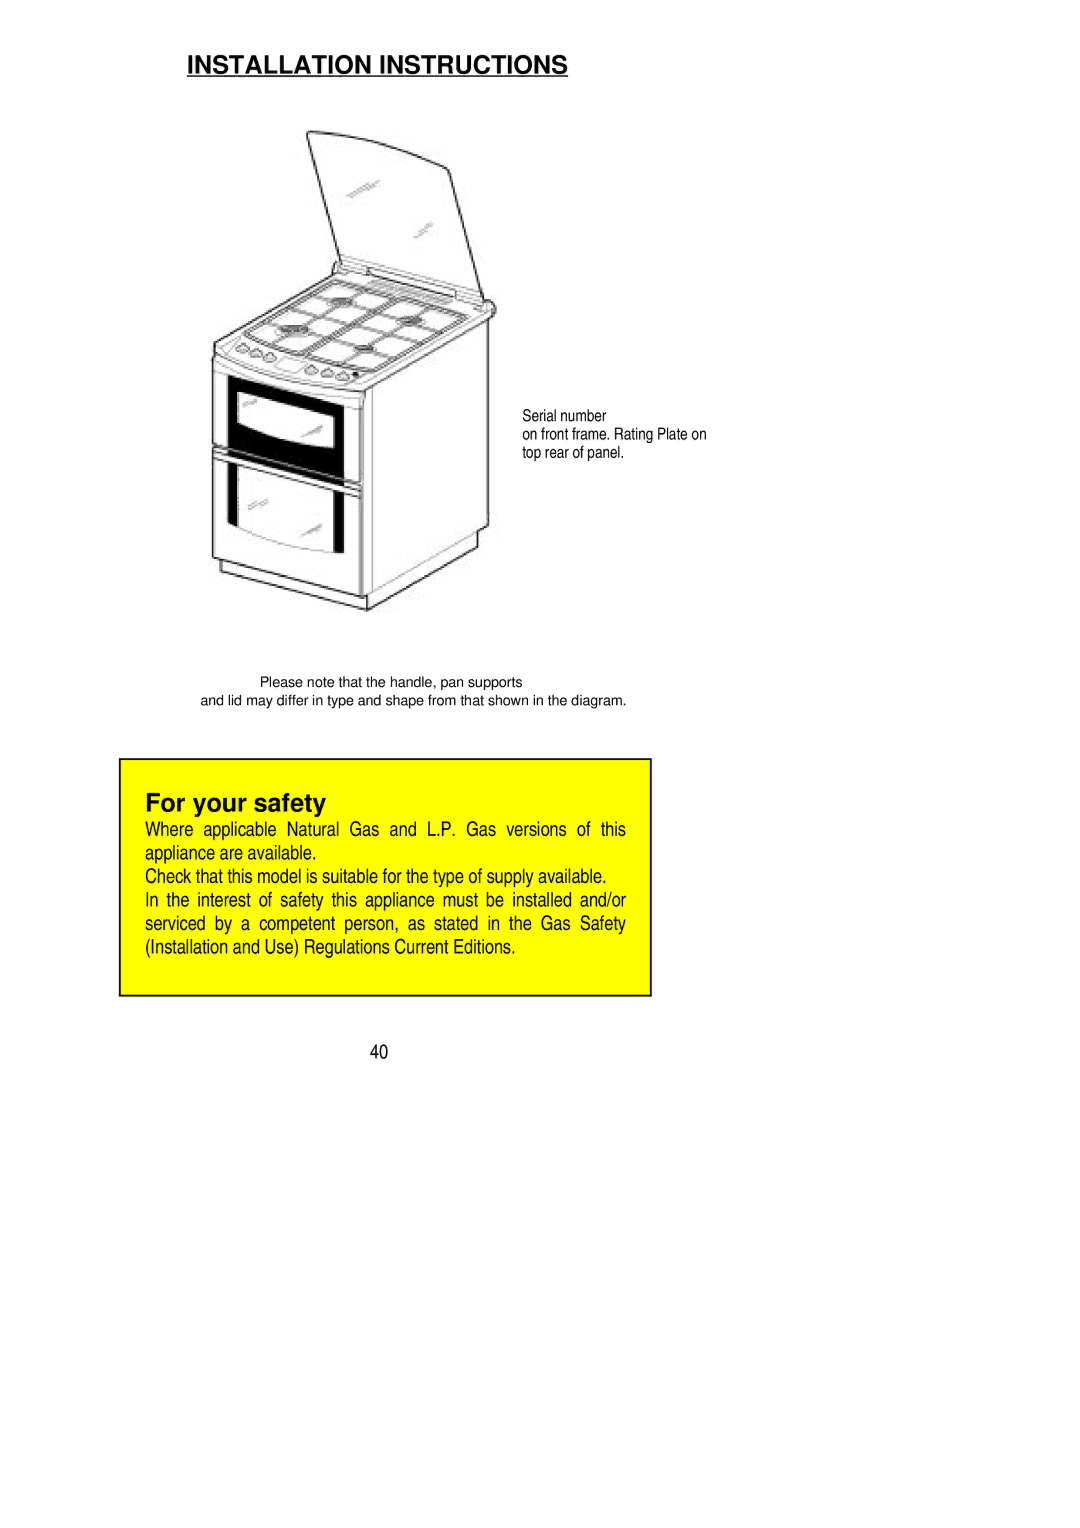 Electrolux SG 505X installation instructions Installation Instructions 